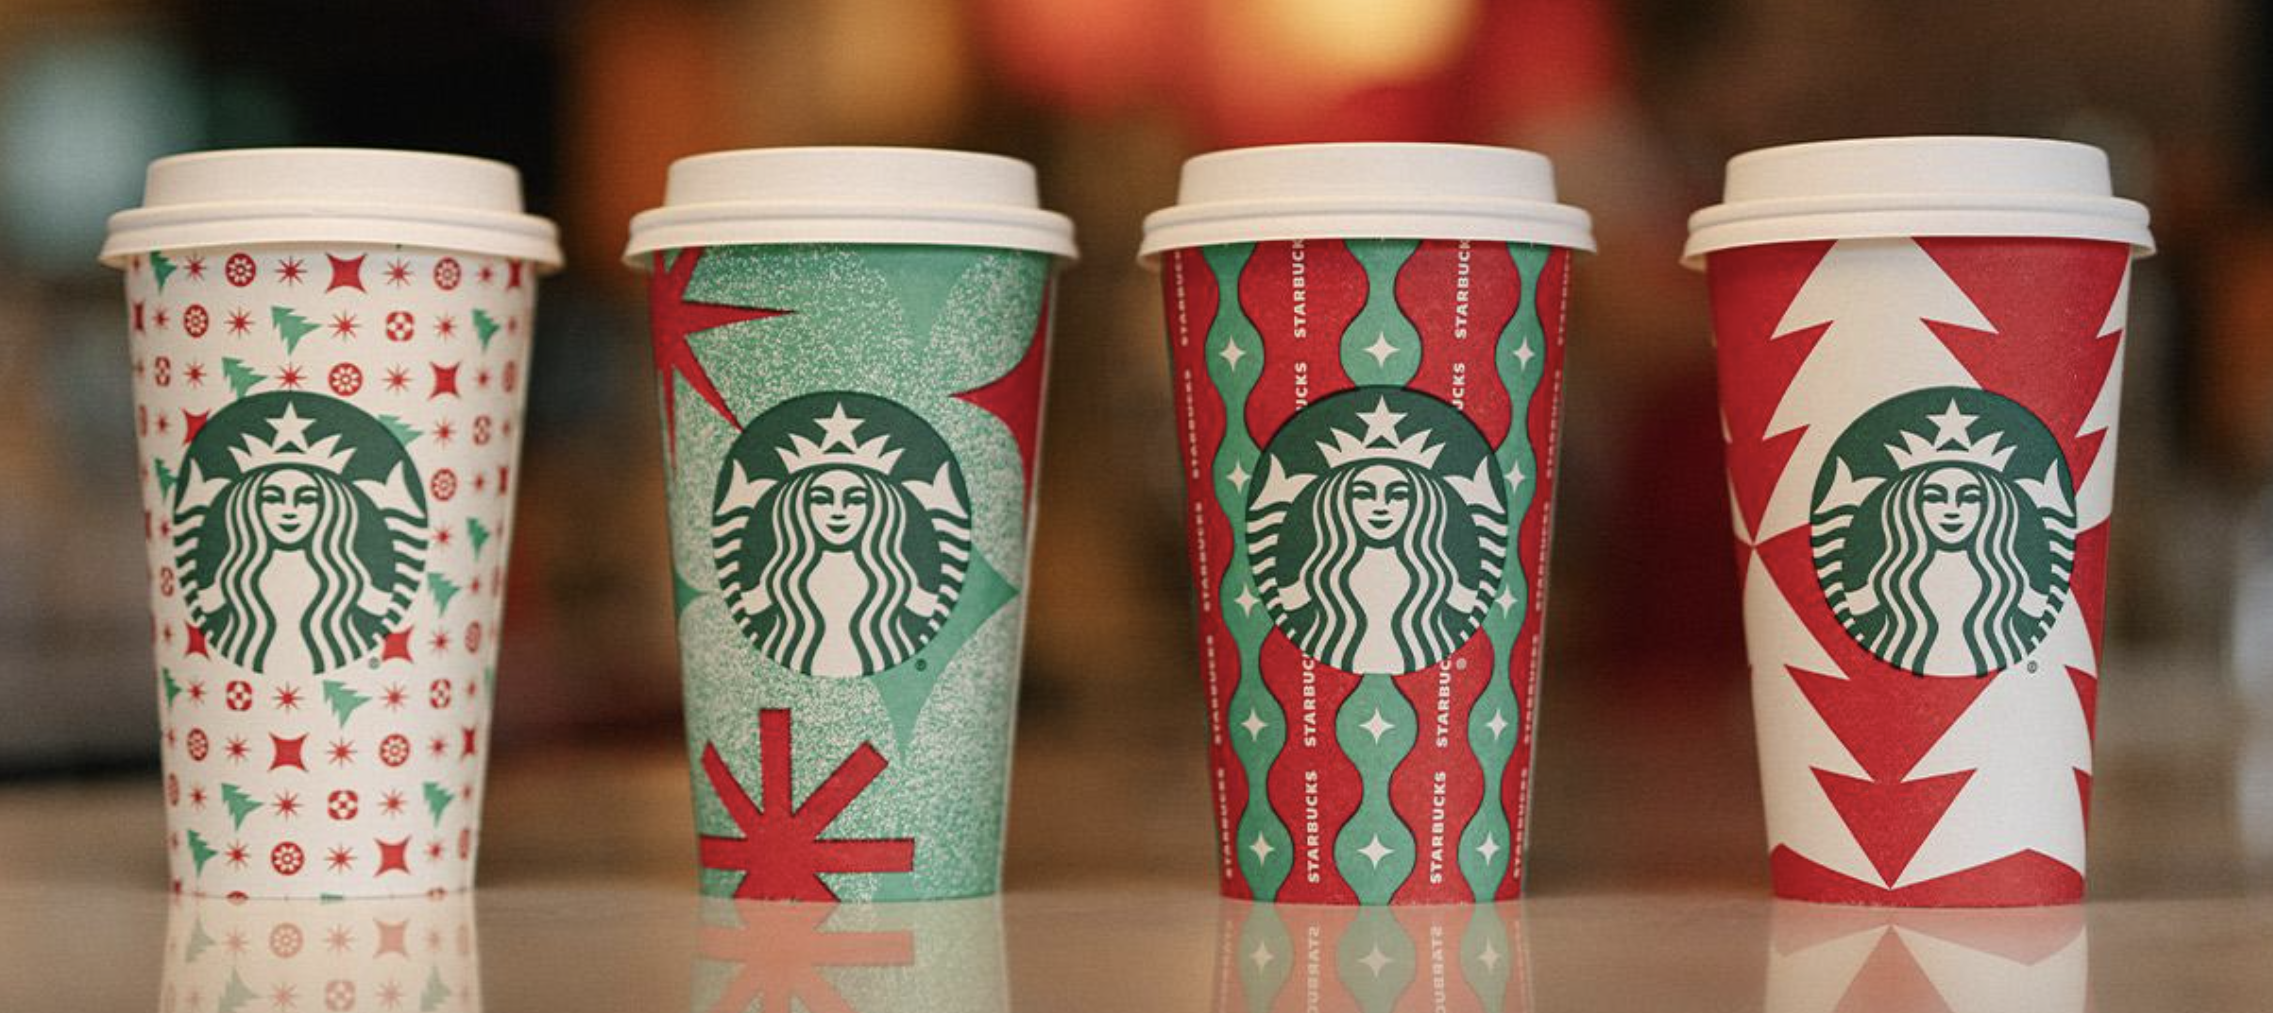 https://www.disneyfoodblog.com/wp-content/uploads/2022/11/2022-starbucks-holiday-cups-2.png